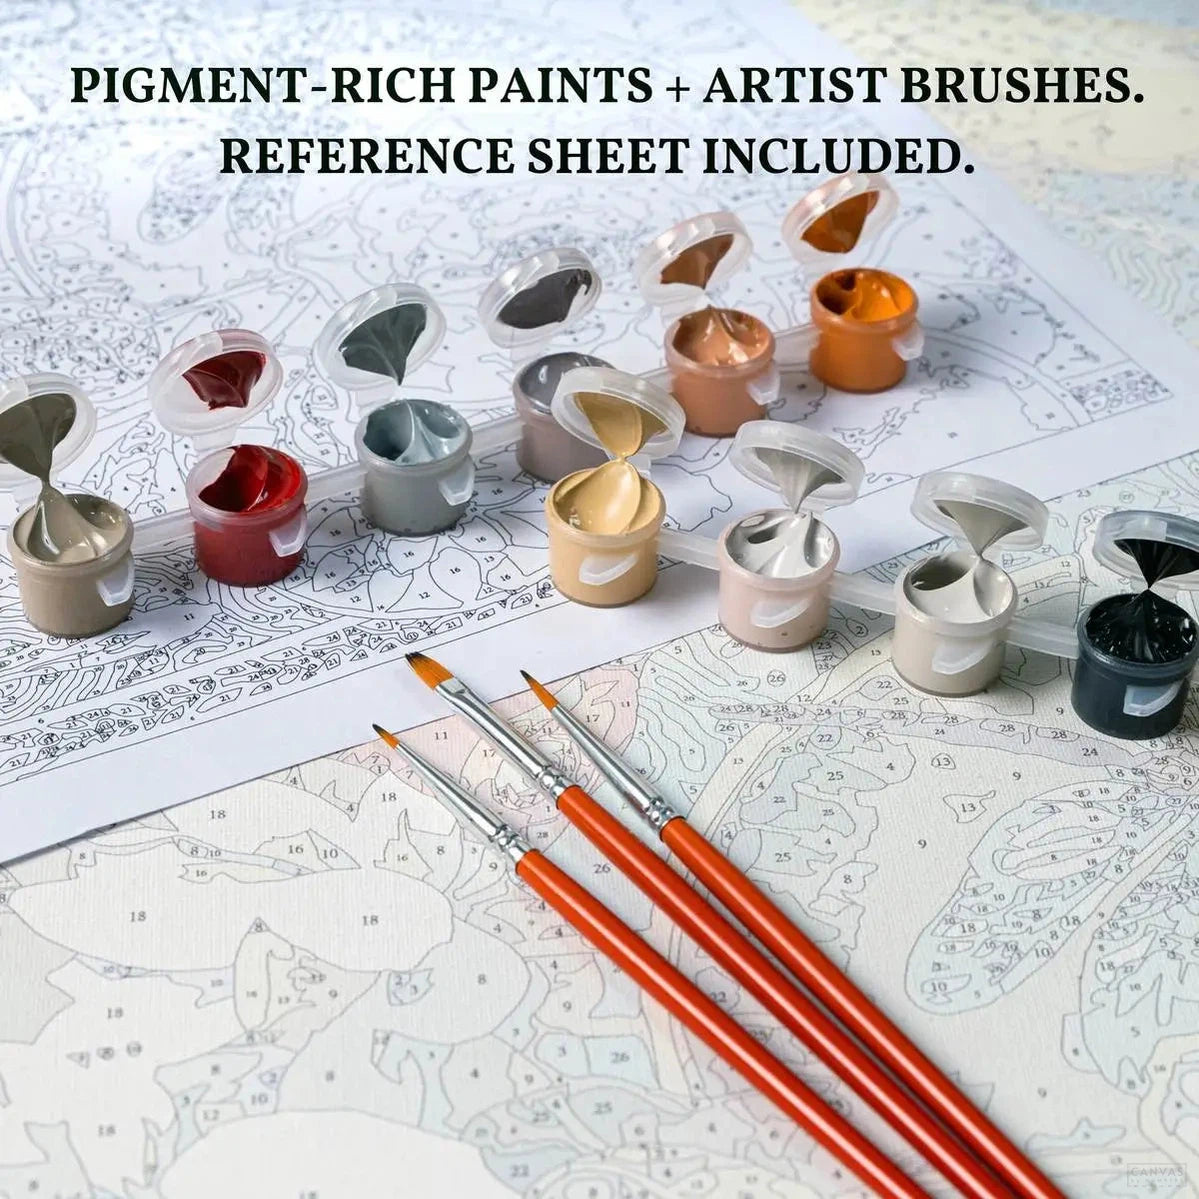 Peaceful Greys: Captivating Wolf Paint by Numbers Kit-In Peaceful Greys by Scot Storm, wolf paint by numbers lets you paint the spirit of the wild and capture the beauty of wolves painting on canvas effortlessly.-Canvas by Numbers